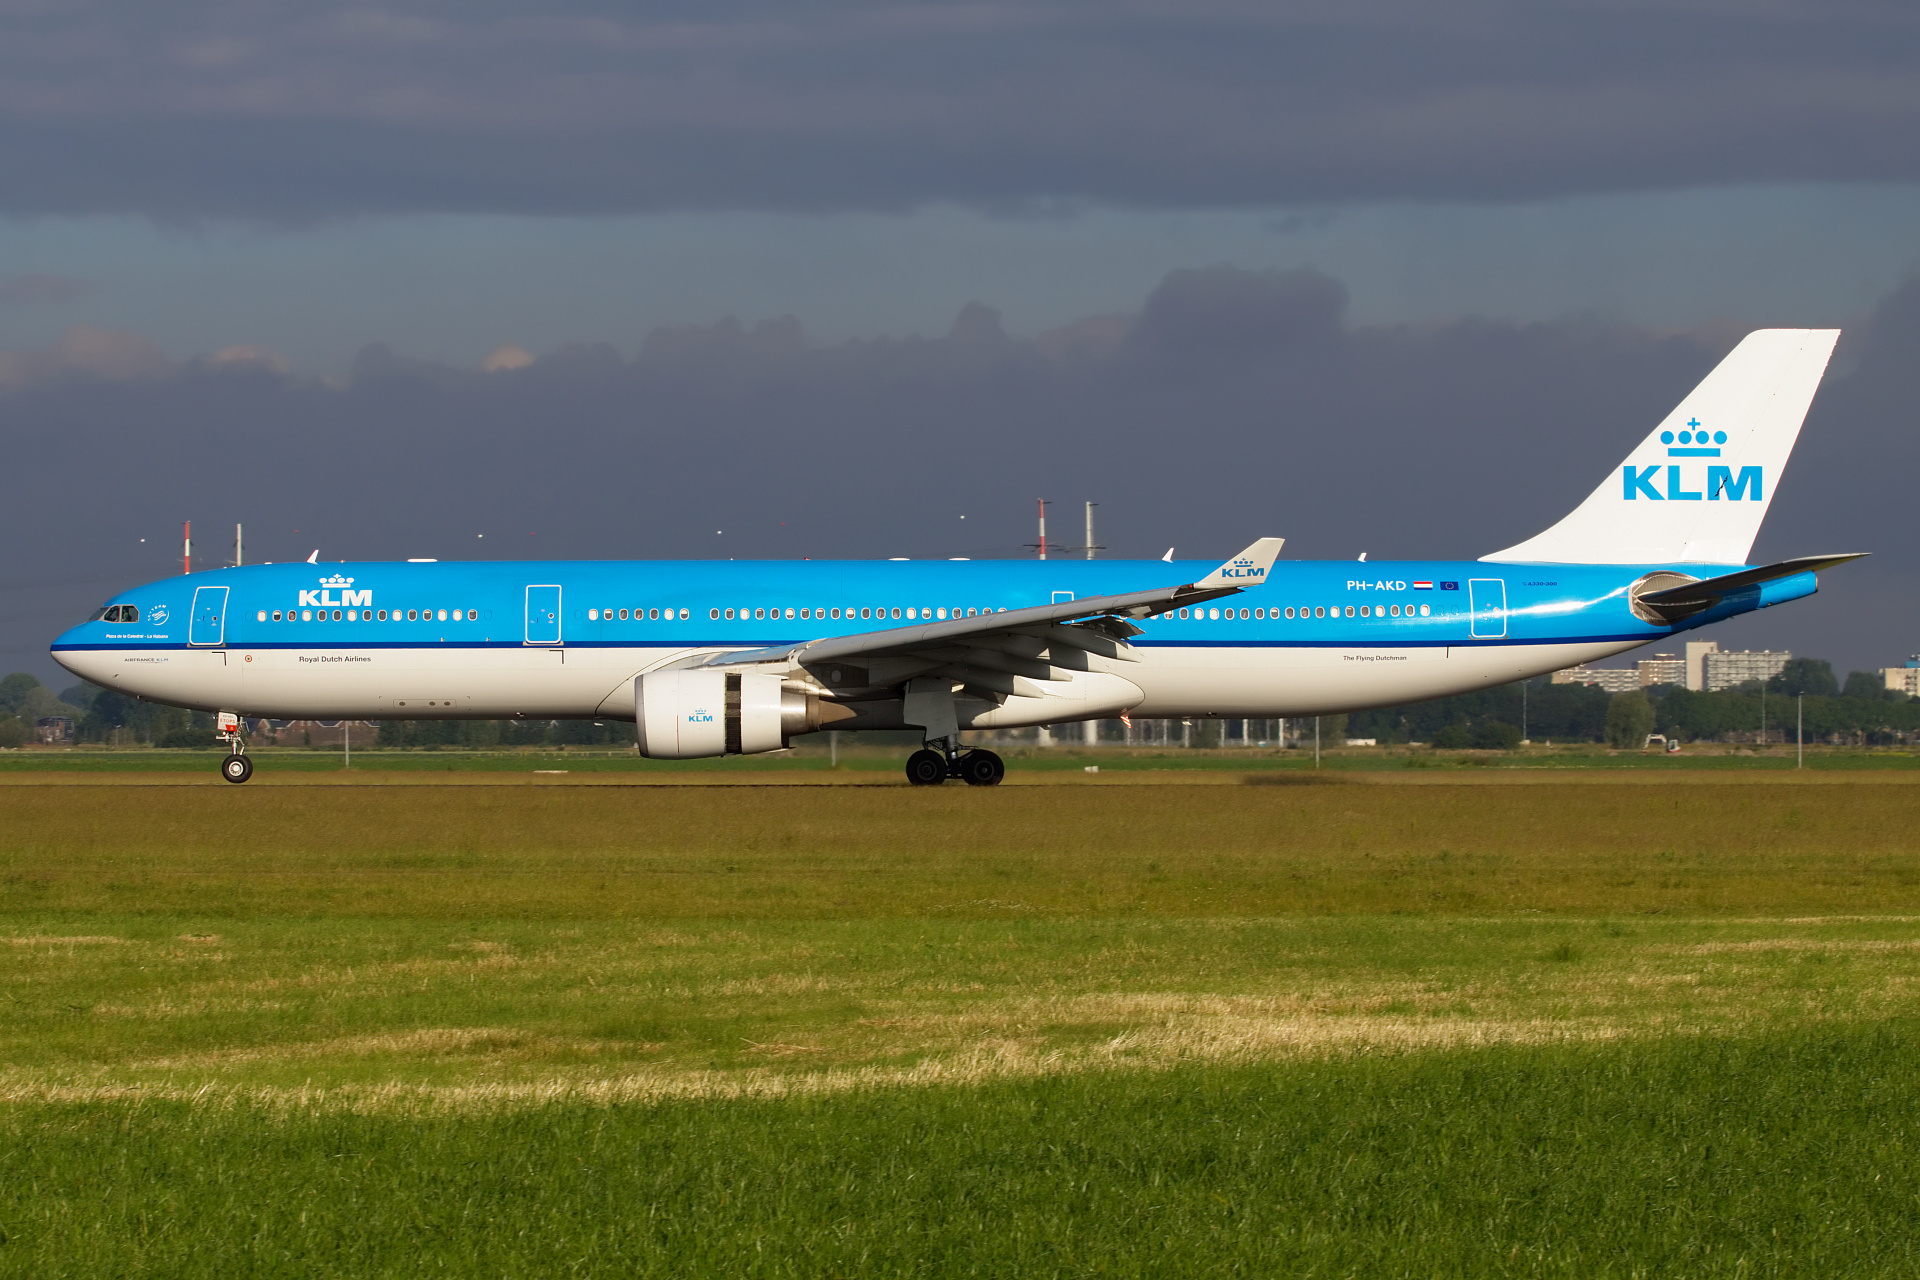 PH-AKD (Aircraft » Schiphol Spotting » Airbus A330-300 » KLM Royal Dutch Airlines)